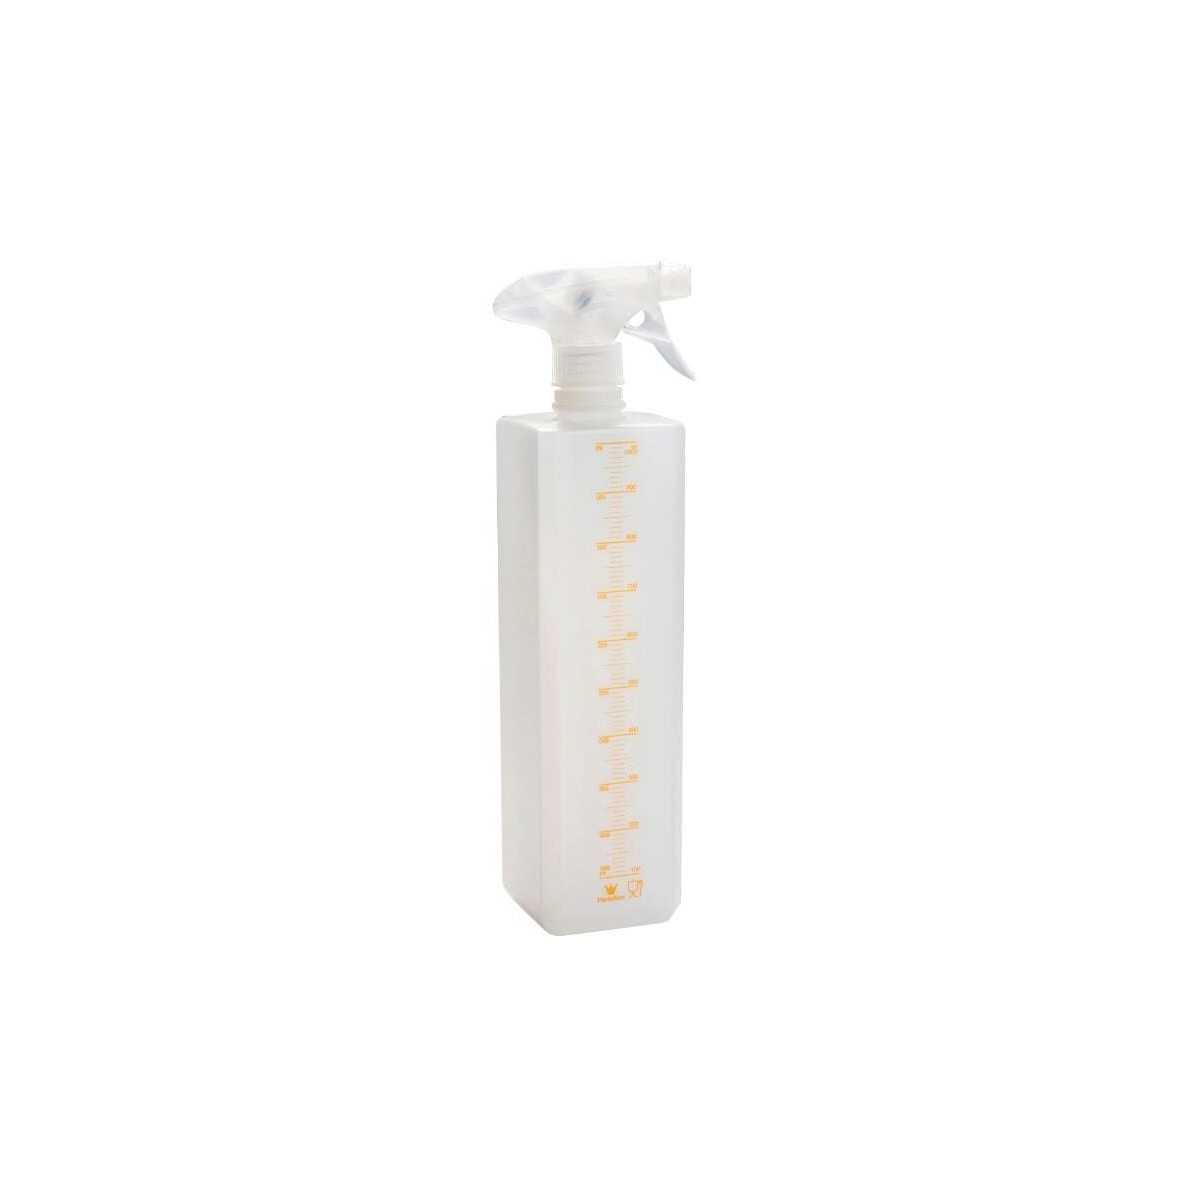 FEED BOTTLE 1L WITH SPRAYER